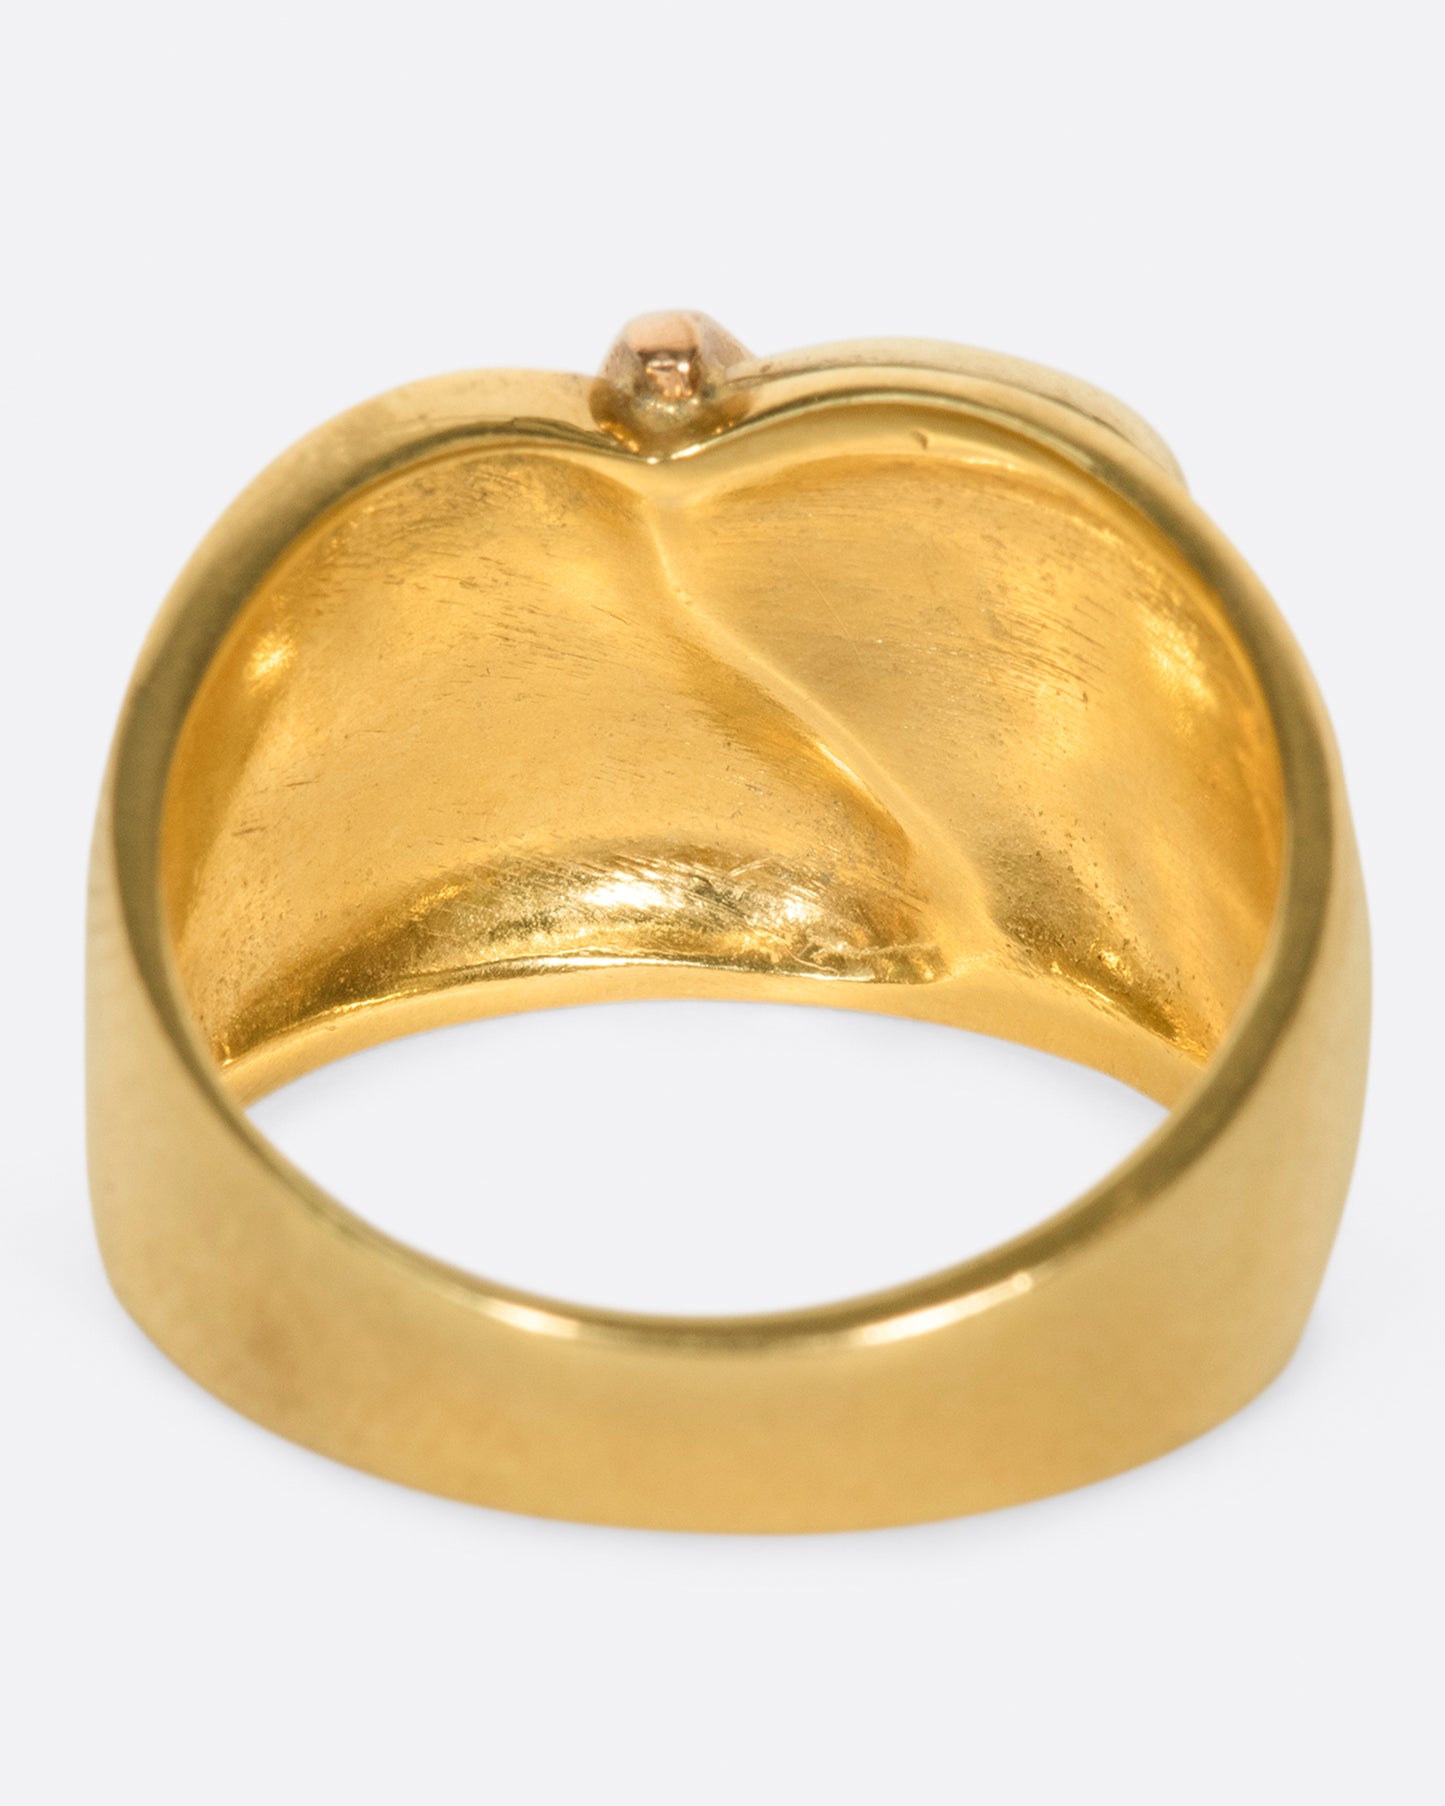 A wide, dimpled yellow gold band with white and rose gold teardrop accents.